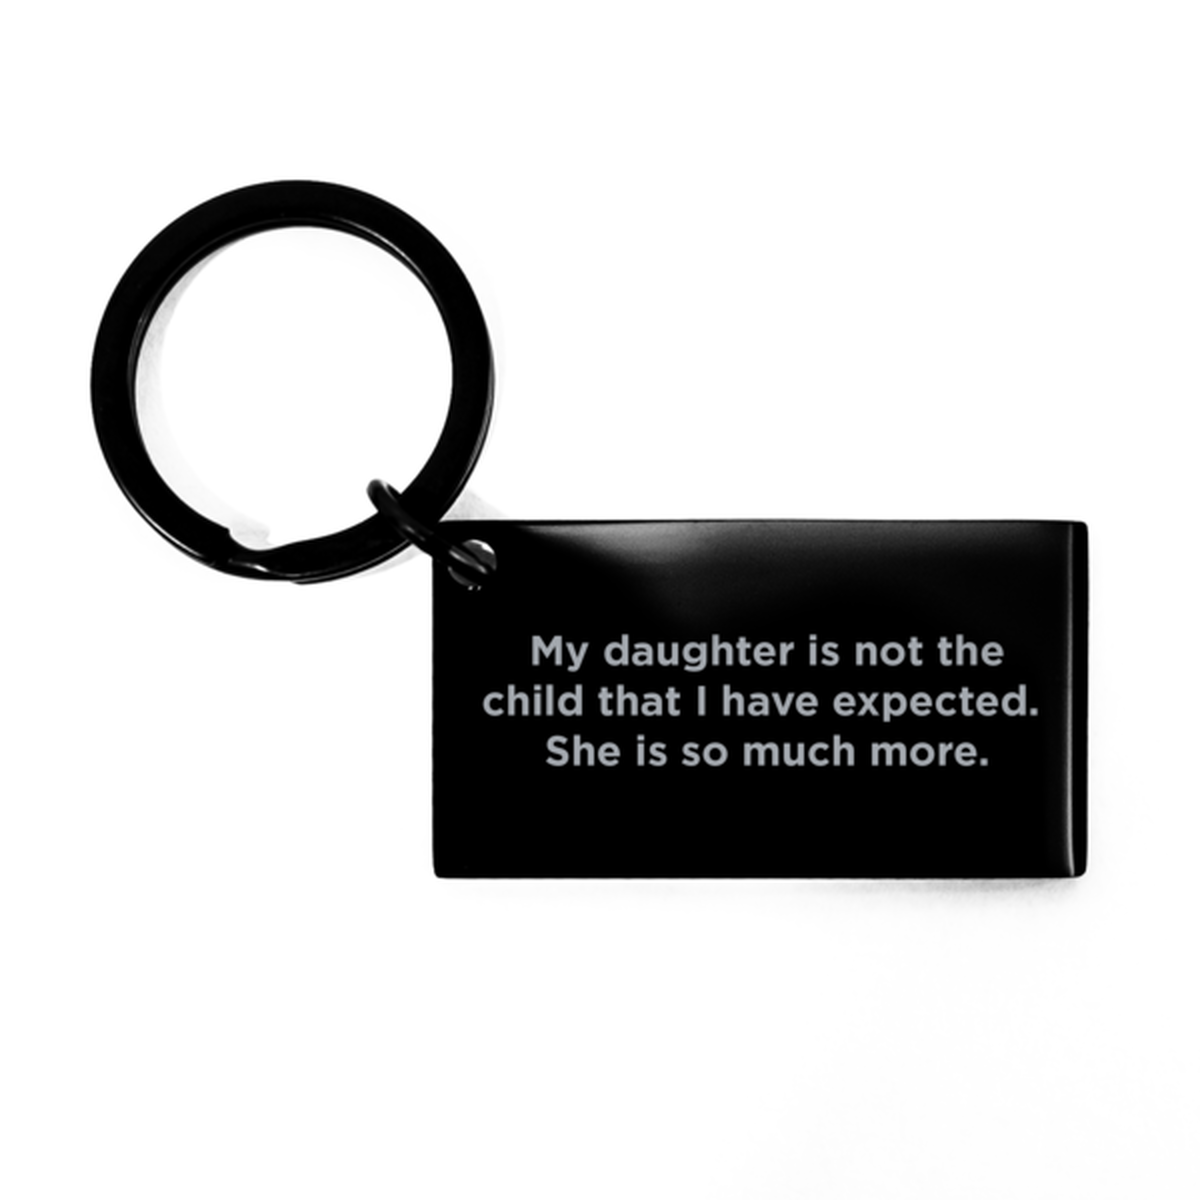 To My Daughter Black Keychain, She Is So Much More, Birthday Gifts For Daughter From Mom, Christmas Gifts For Women